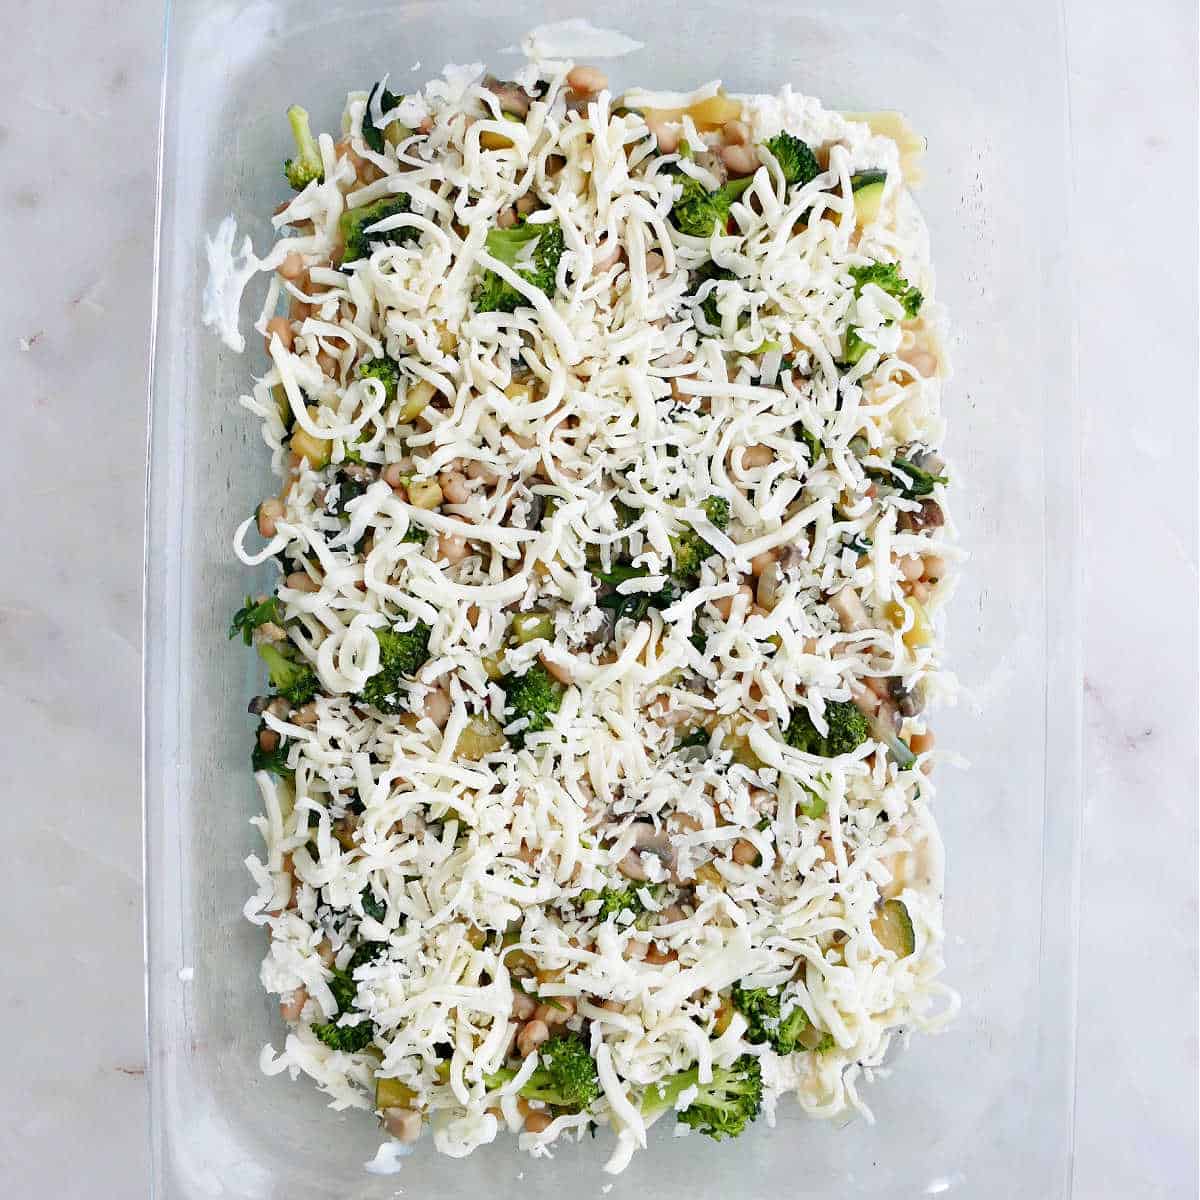 lasagna ingredients topped with shredded cheese in a baking dish